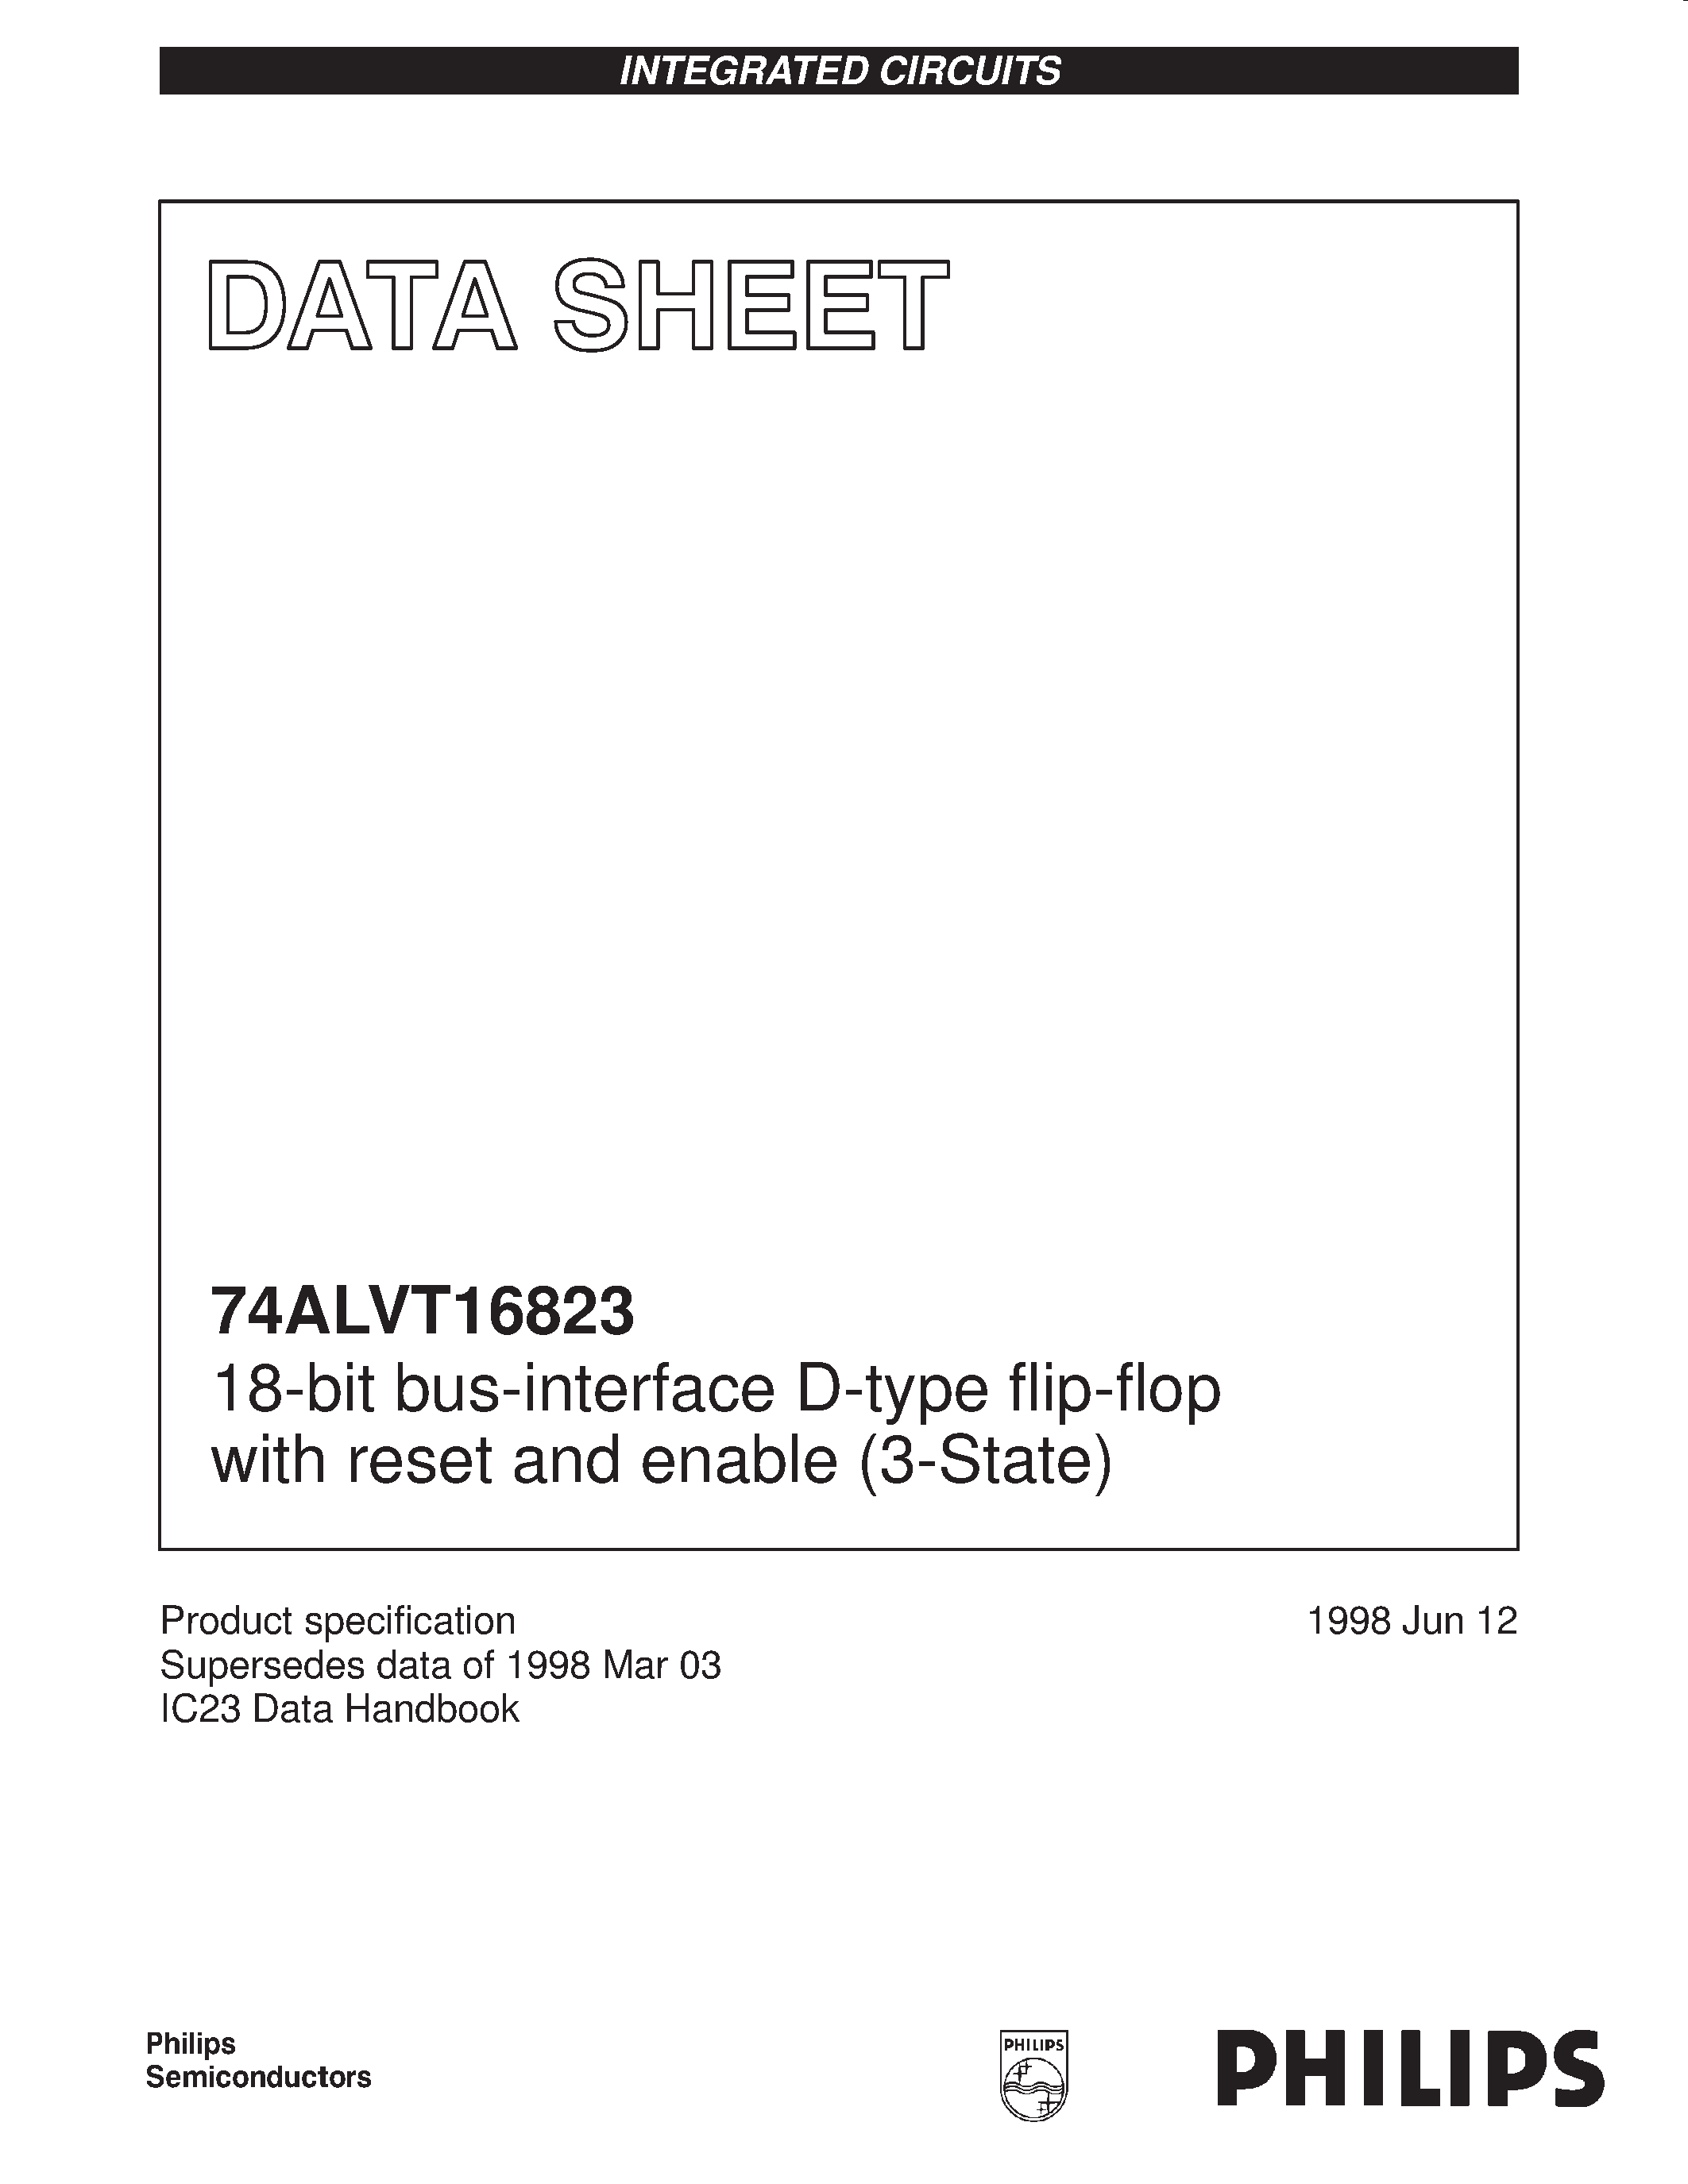 Datasheet 74ALVT16823DL - 18-bit bus-interface D-type flip-flop with reset and enable 3-State page 1